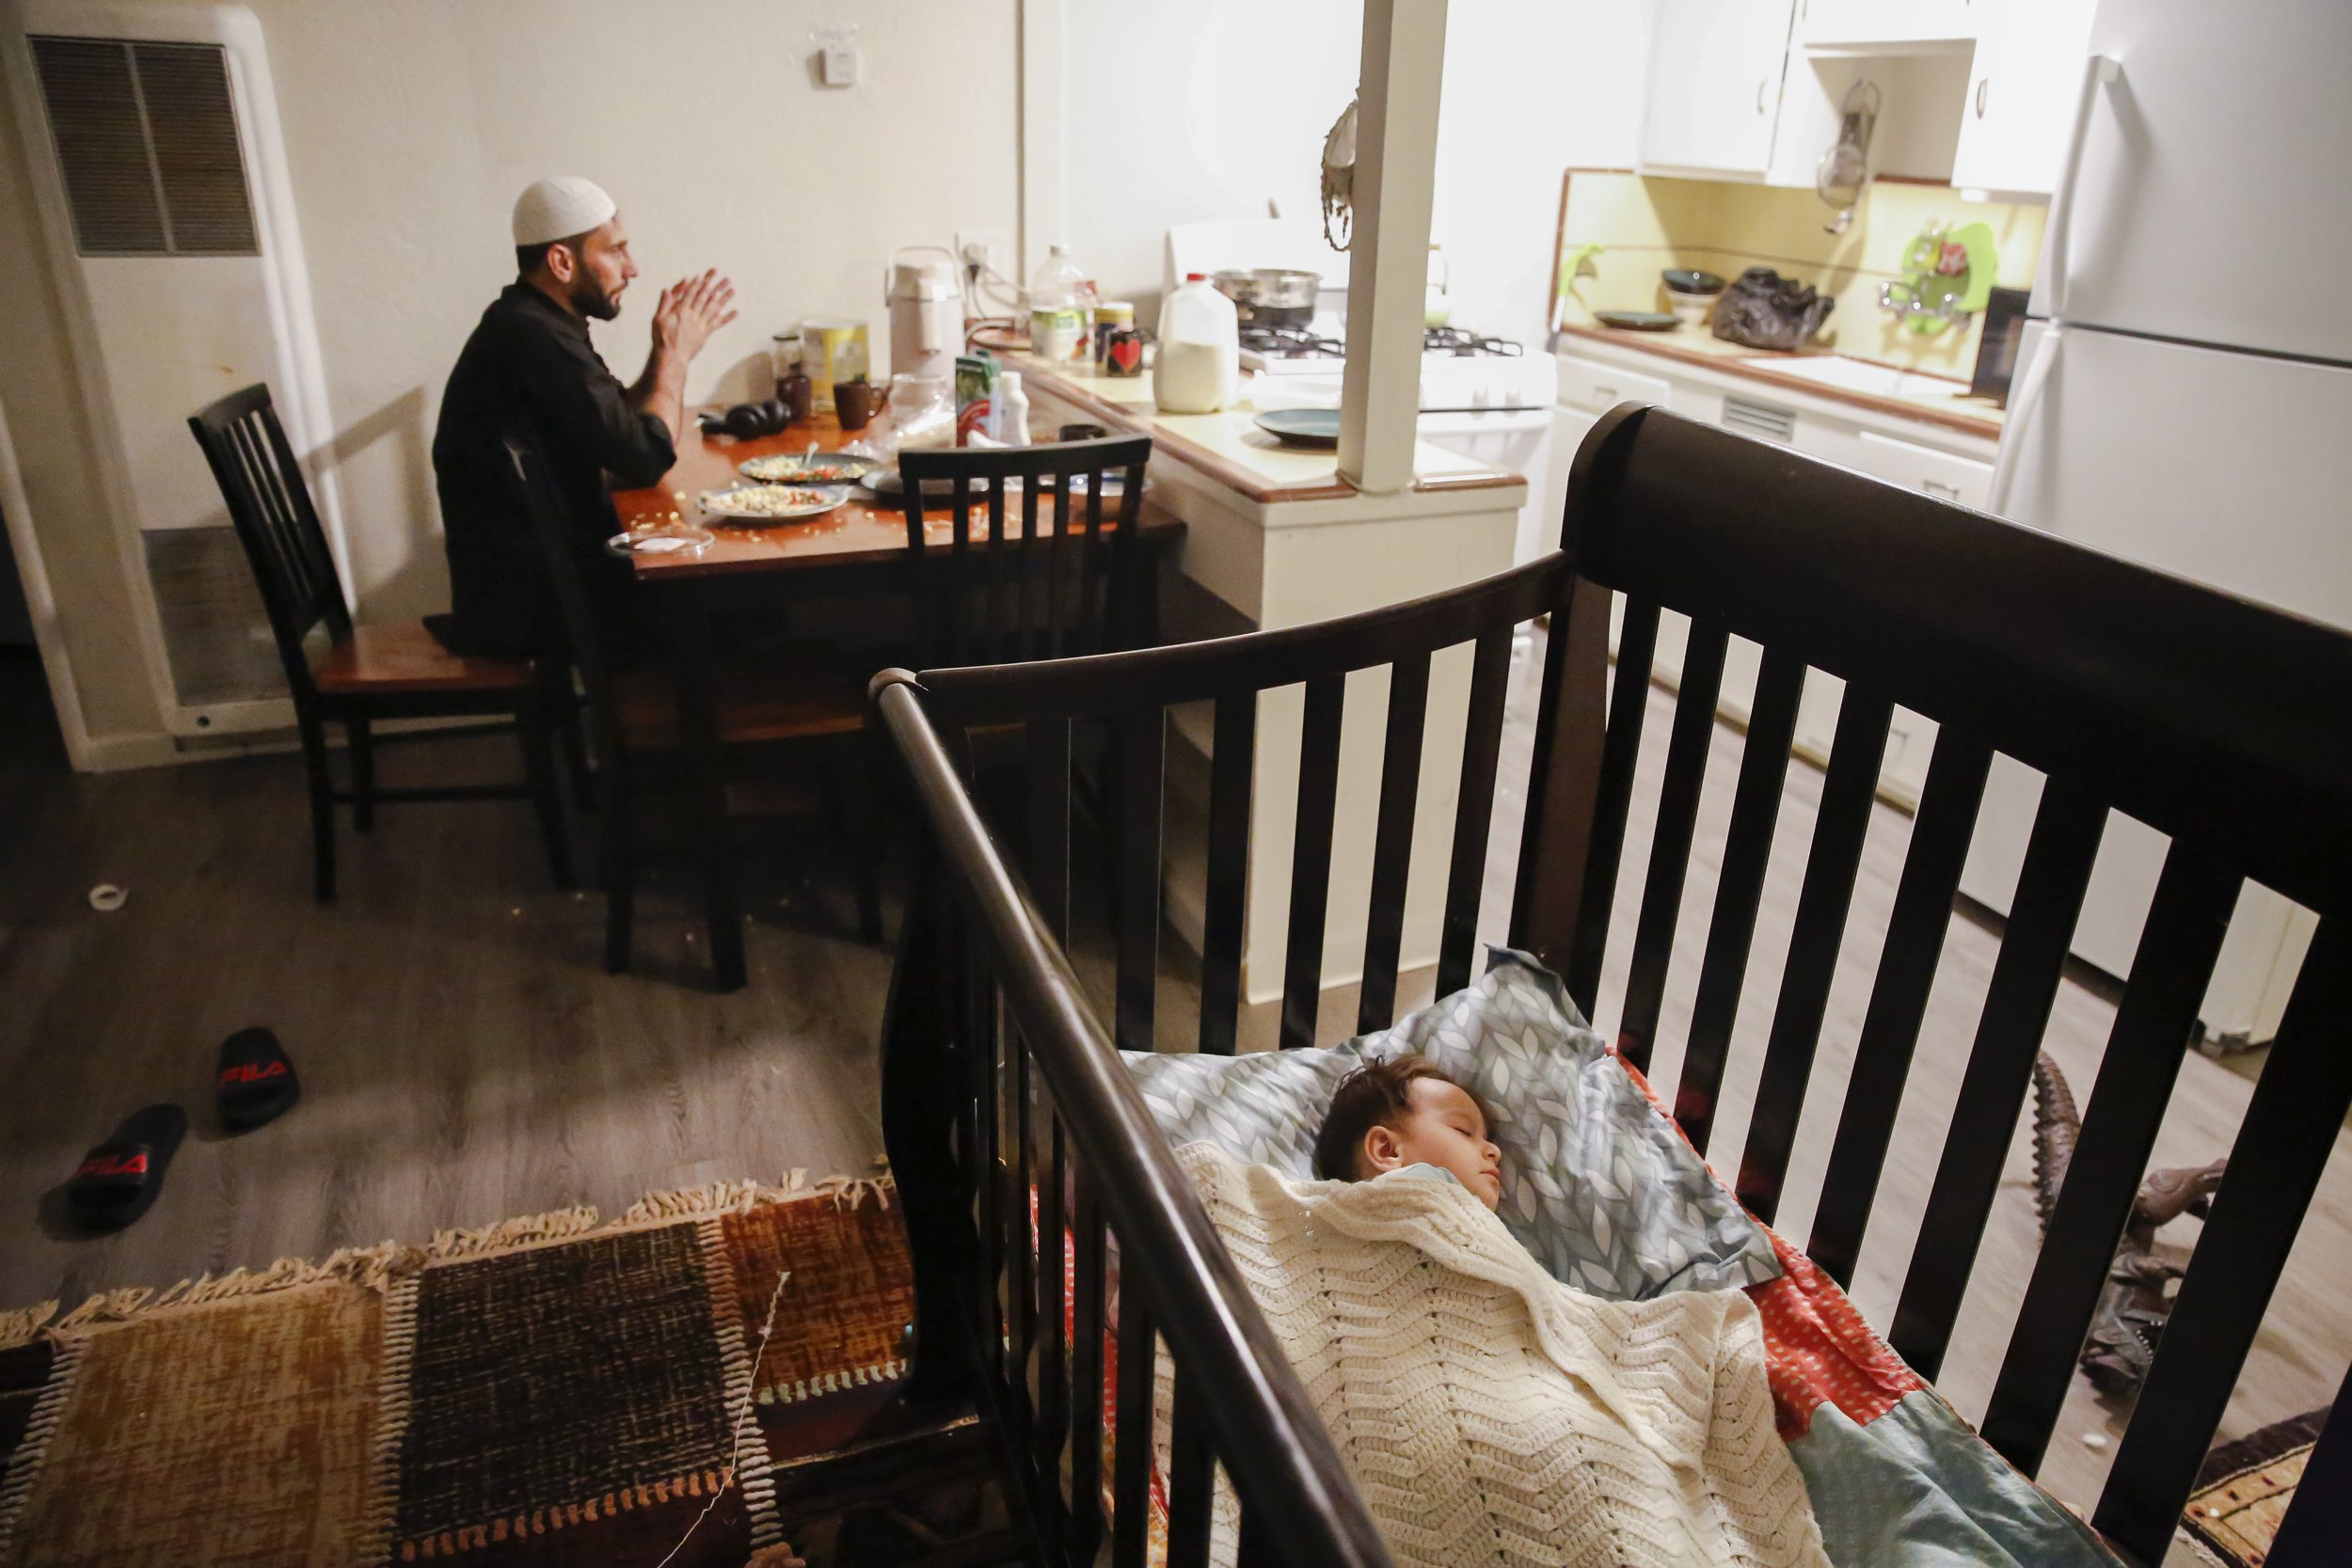  Najibullah Mohammadi sits at the dining table while his son Yasar Mohammadi (2), sleeps in his crib a few feet away in the living room of their one bedroom apartment in Sacramento, Calif. on Sunday, March 27, 2022. Najibullah Mohammadi, his wife Sus